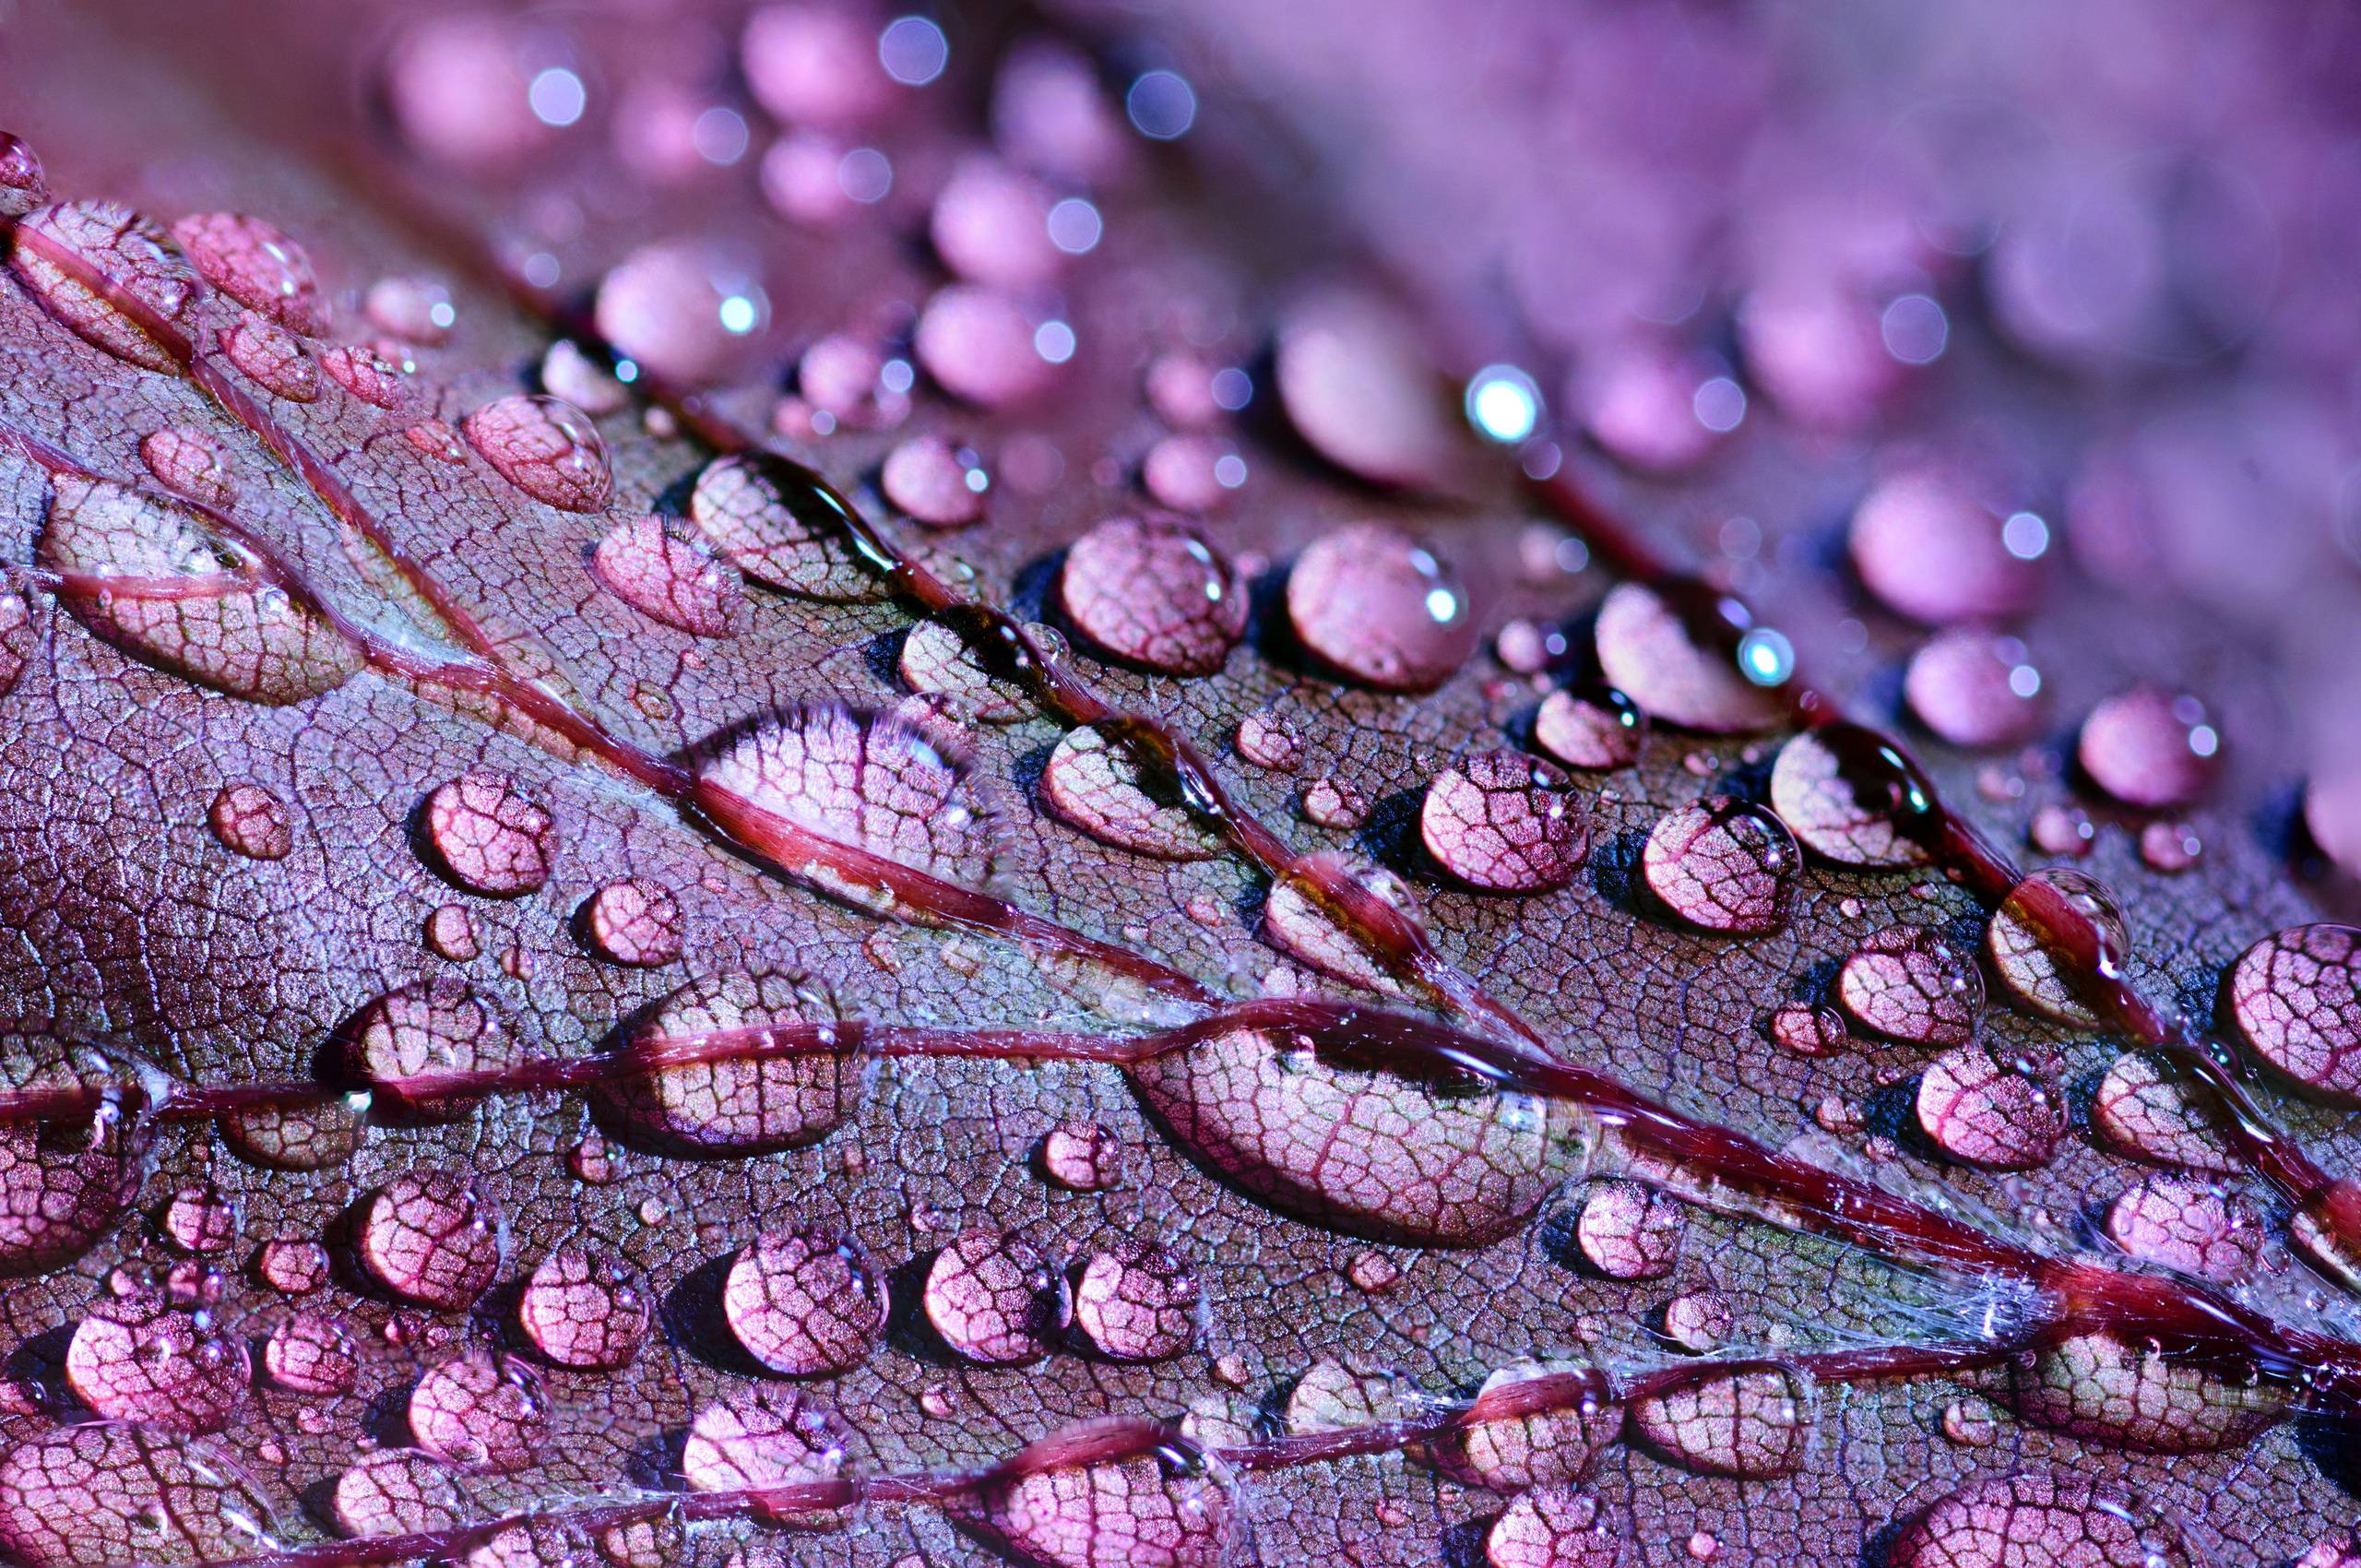 A close up of a purple leaf with water droplets on it - Water